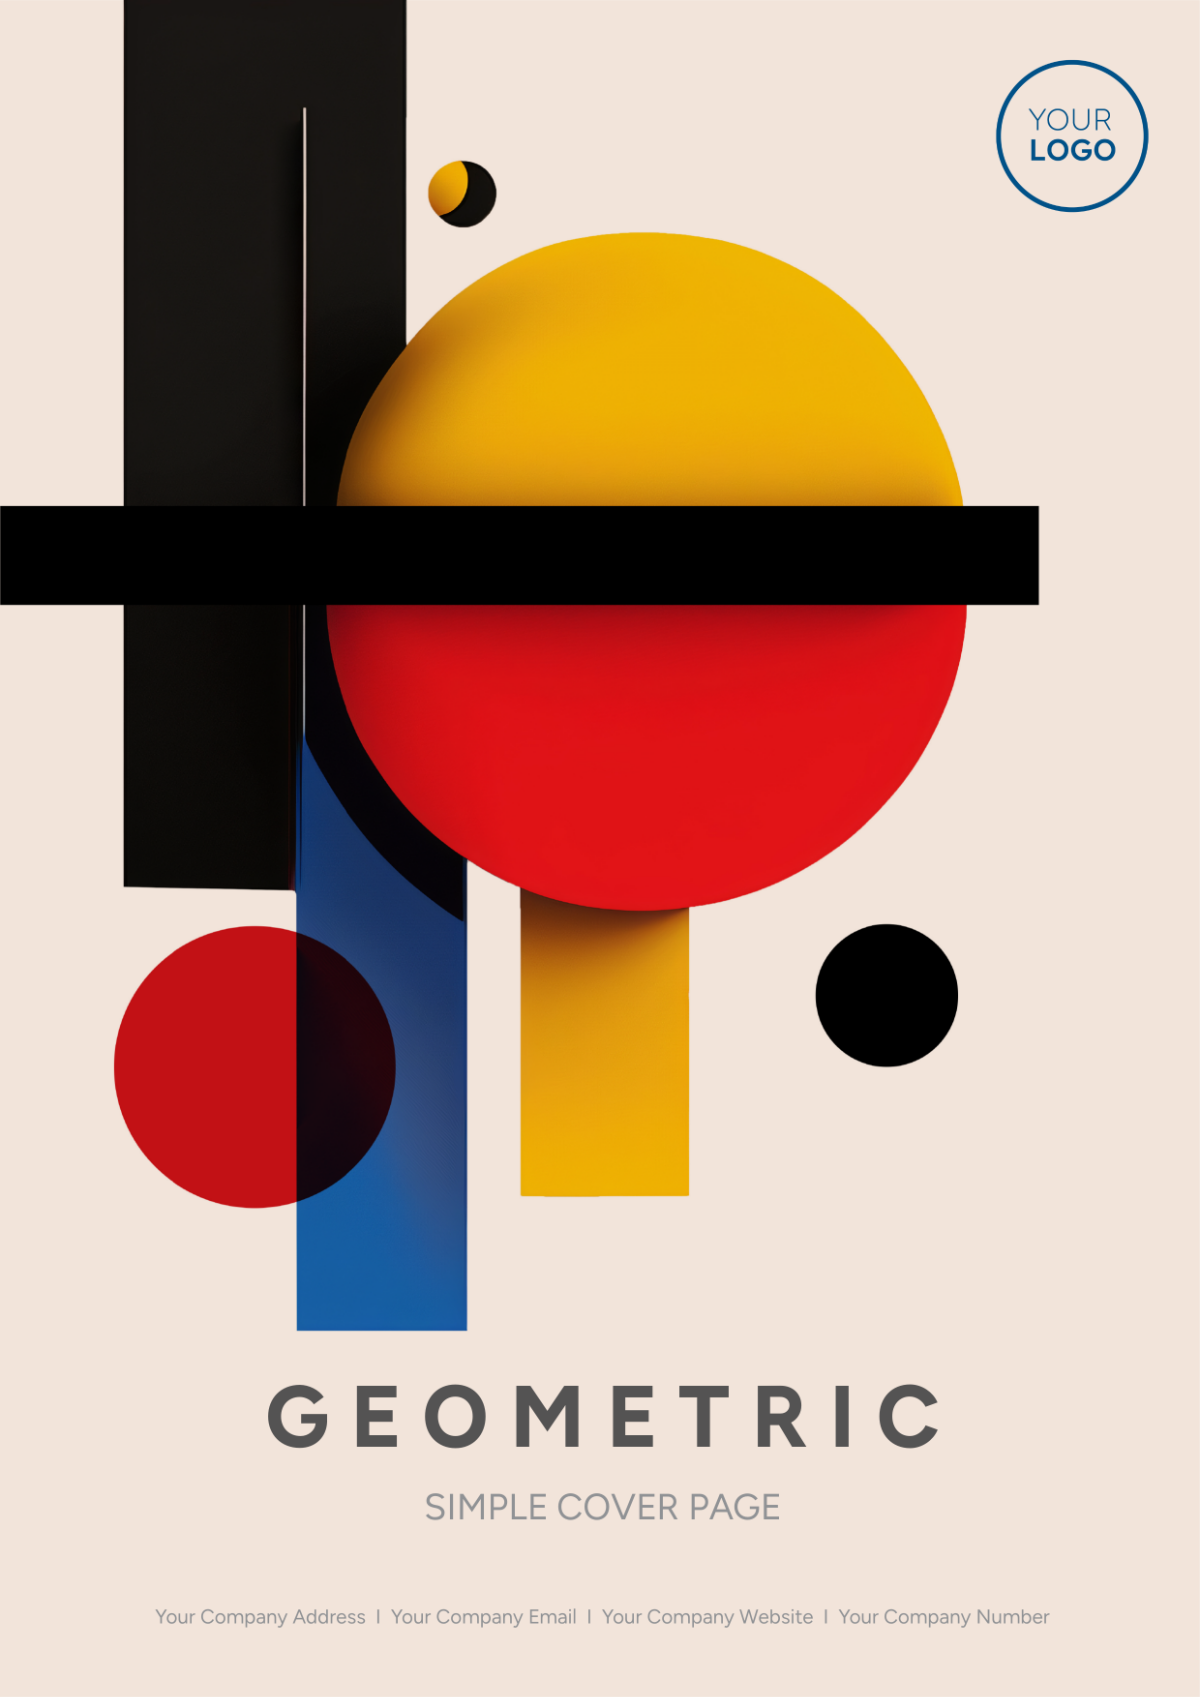 Geometric Simple Cover Page